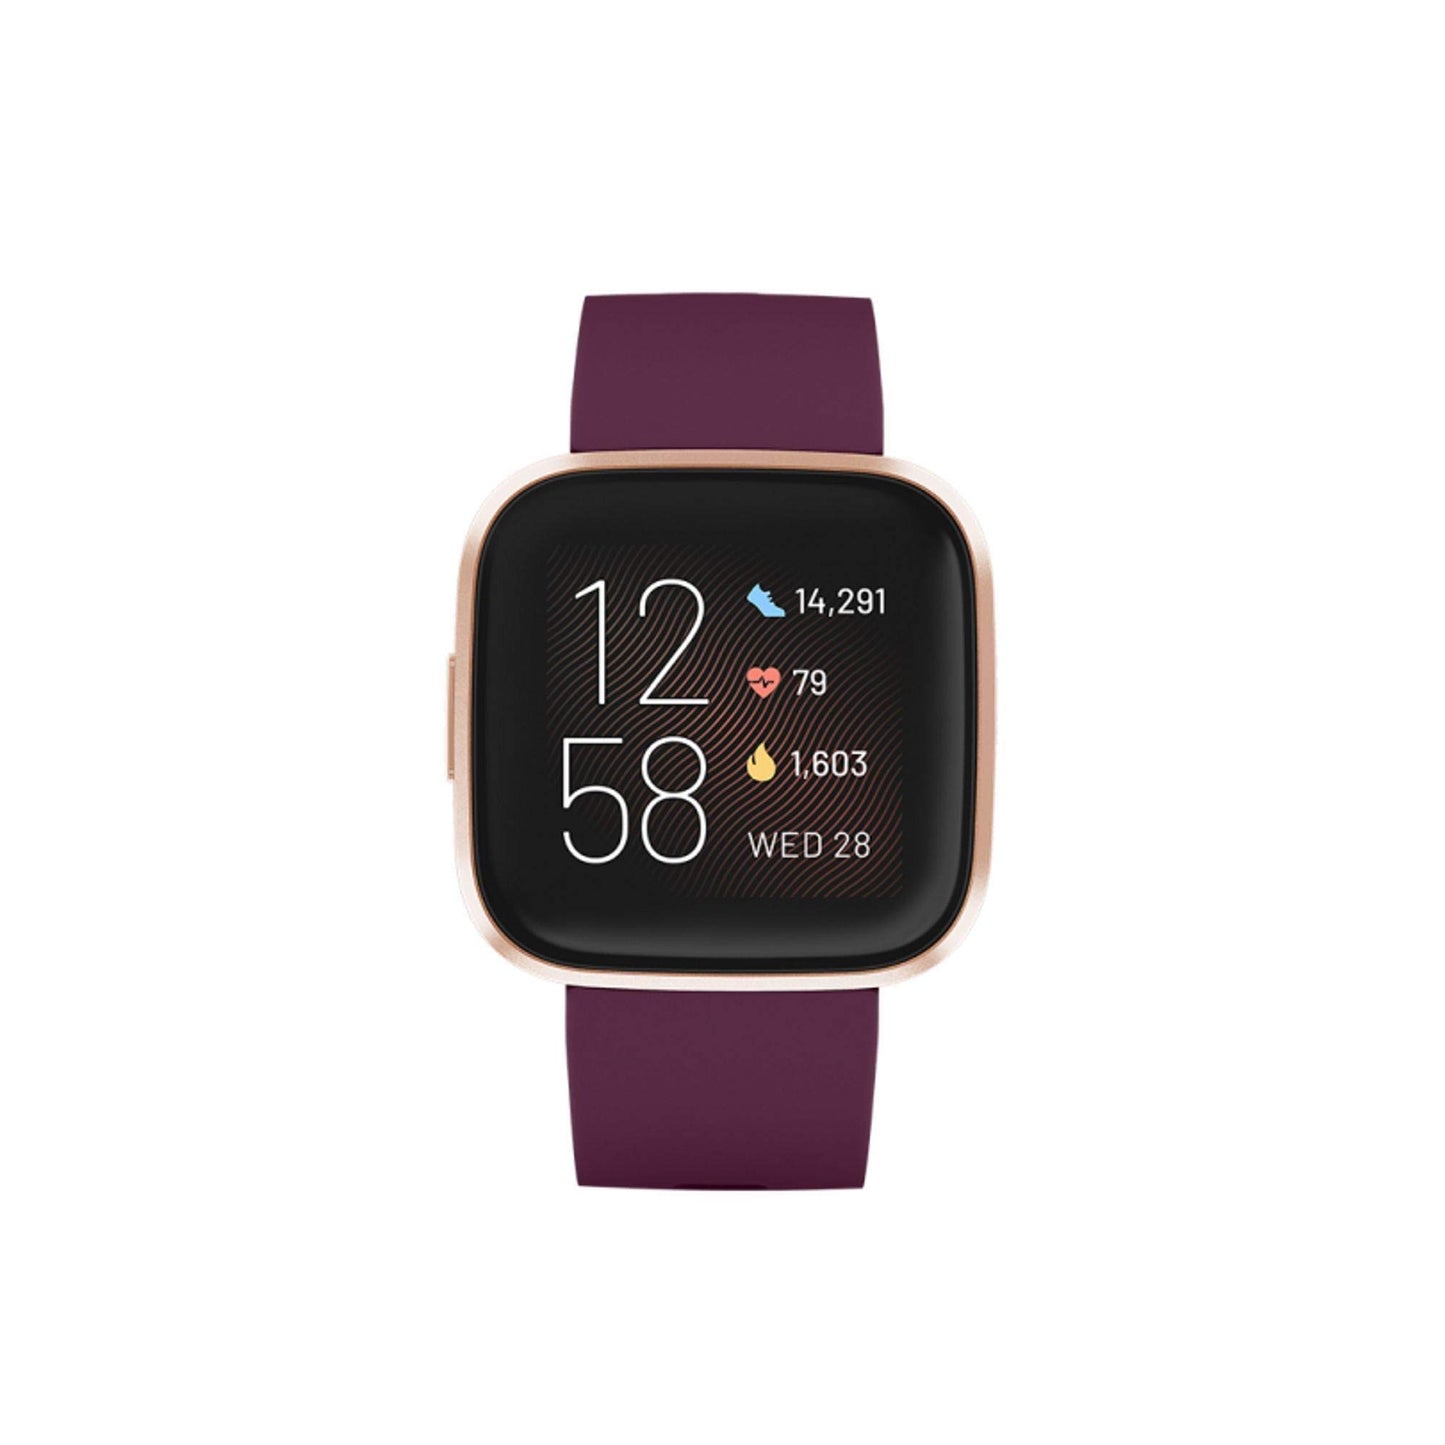 Fitbit Versa 2 Health and Fitness Smartwatch with Bluetooth, Music, Notifications, Alexa Built-In, One Size (S and L Bands Included), (Black/Carbon)